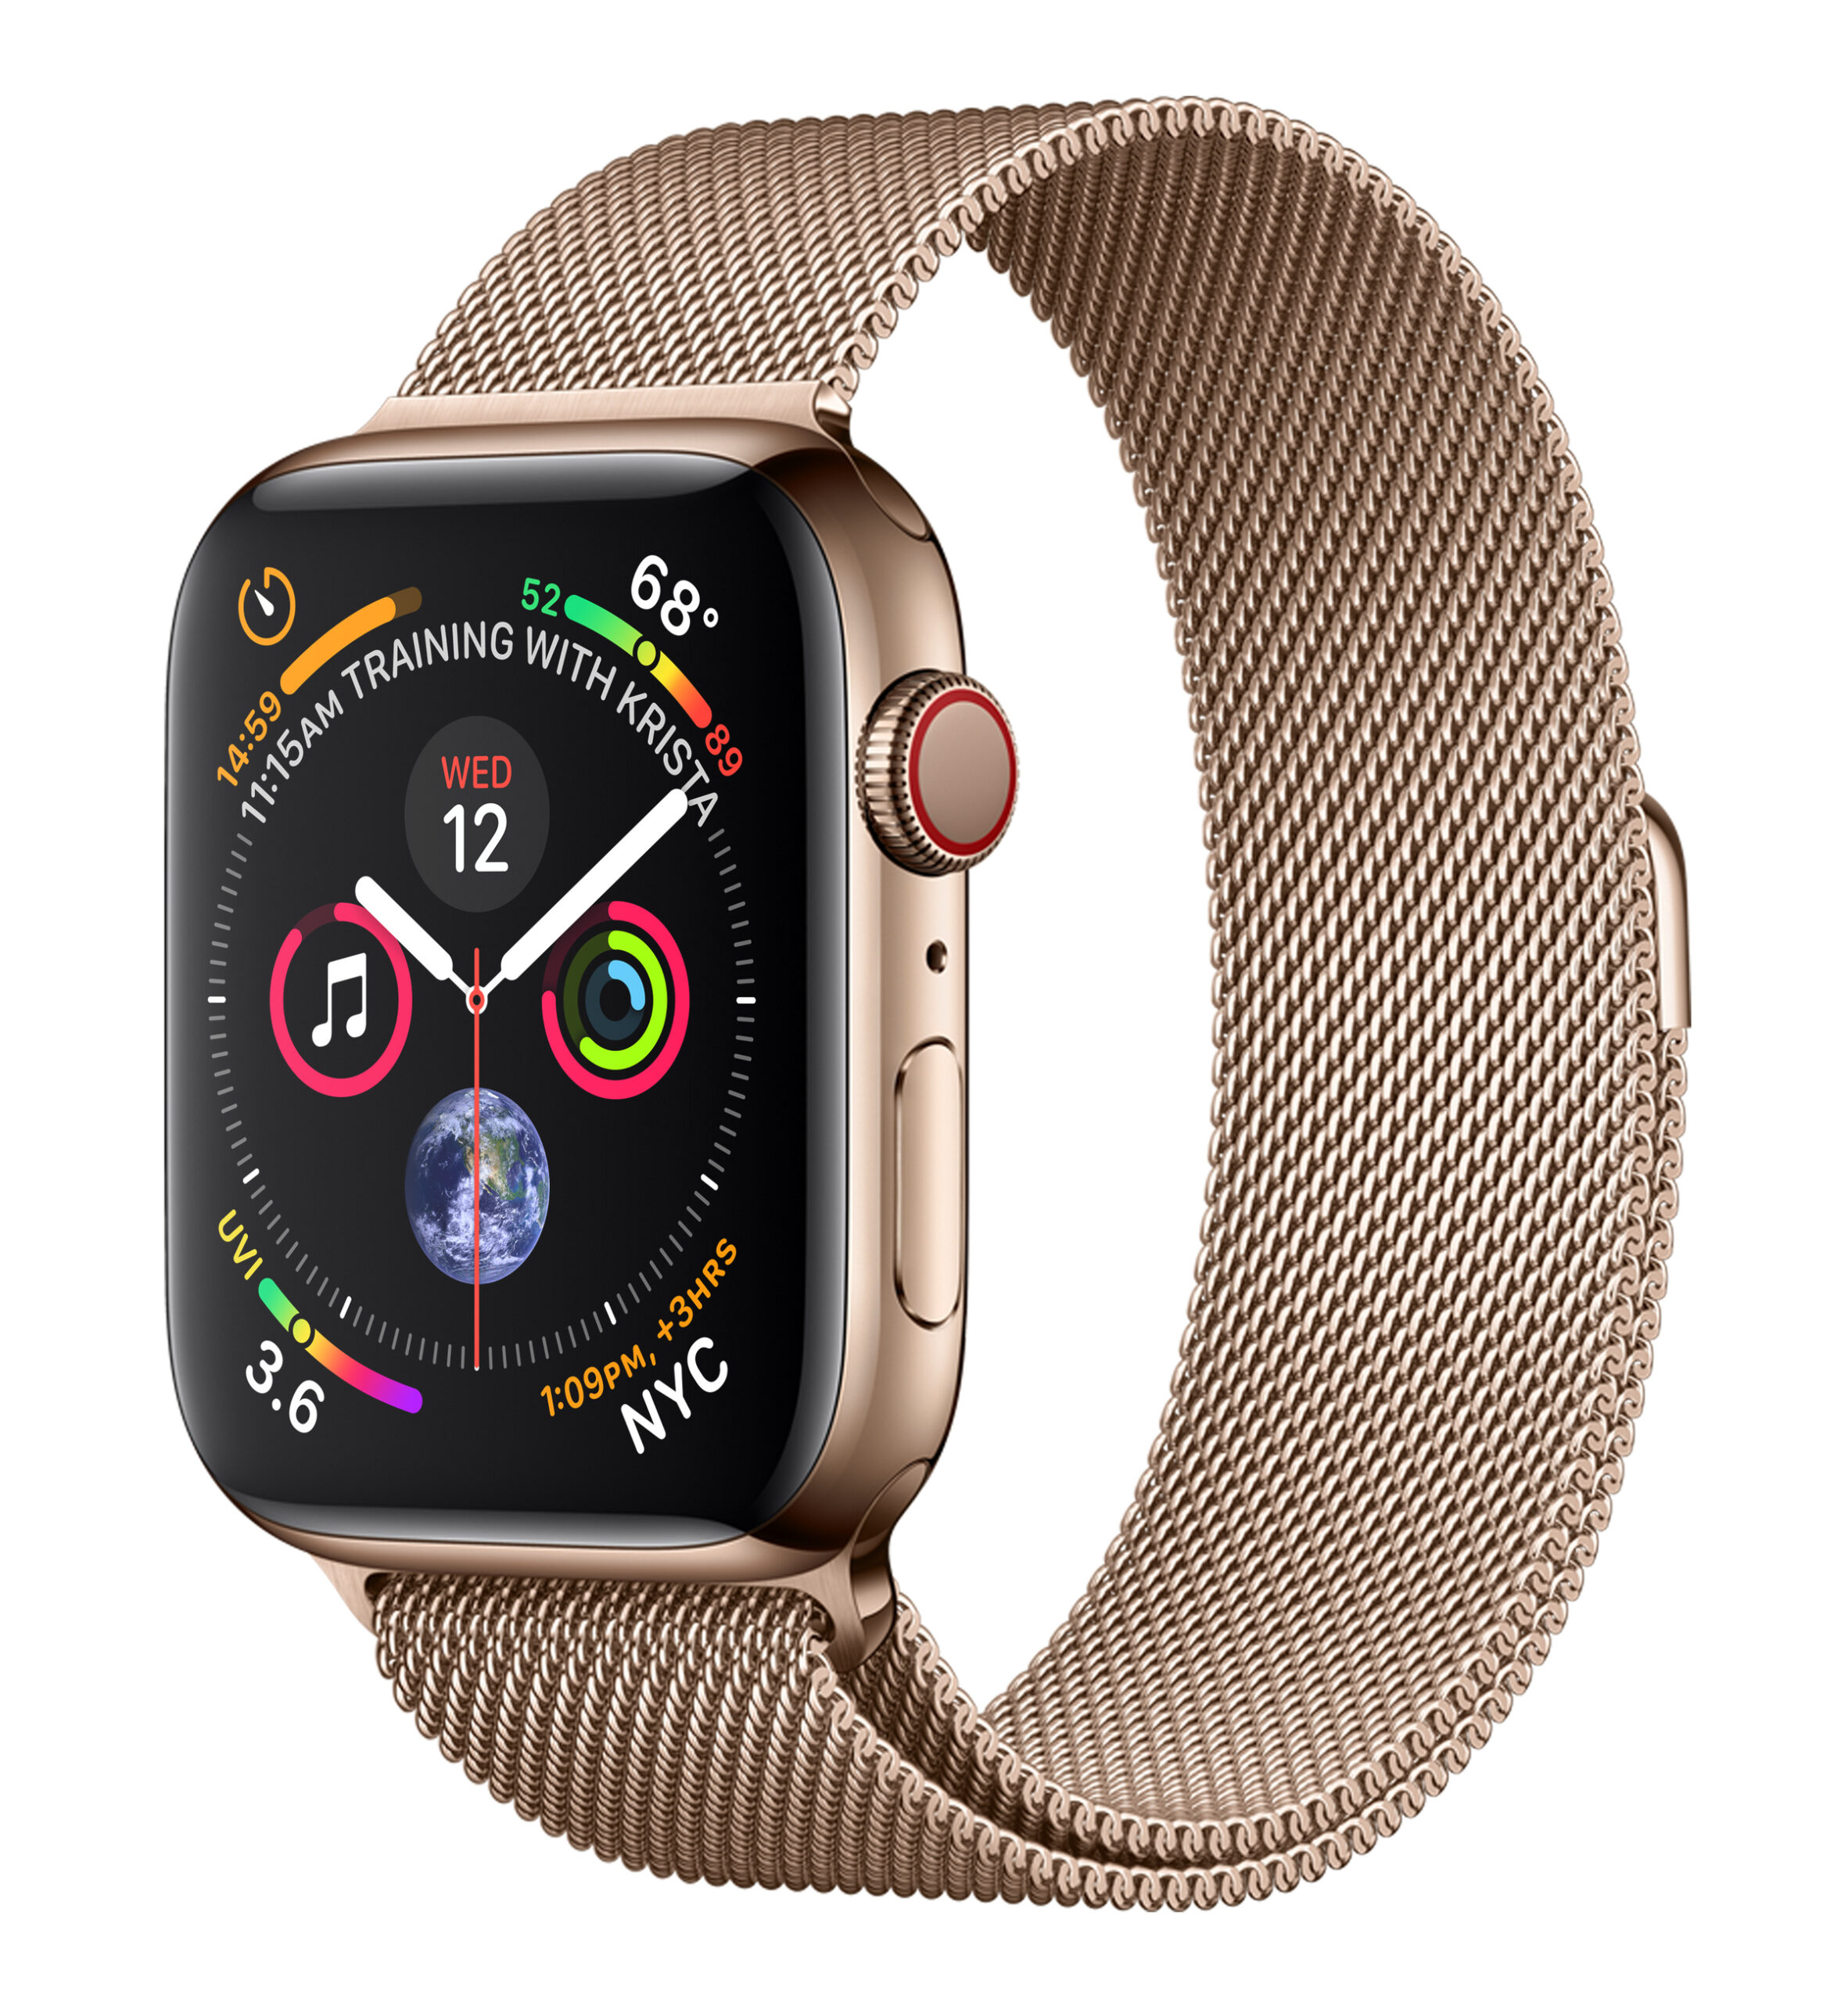 MTV82LL/A | $344 | Apple Watch Series 4 (GPS + Cellular, 44mm, Gold Apple Watch 4 Stainless Steel 44mm